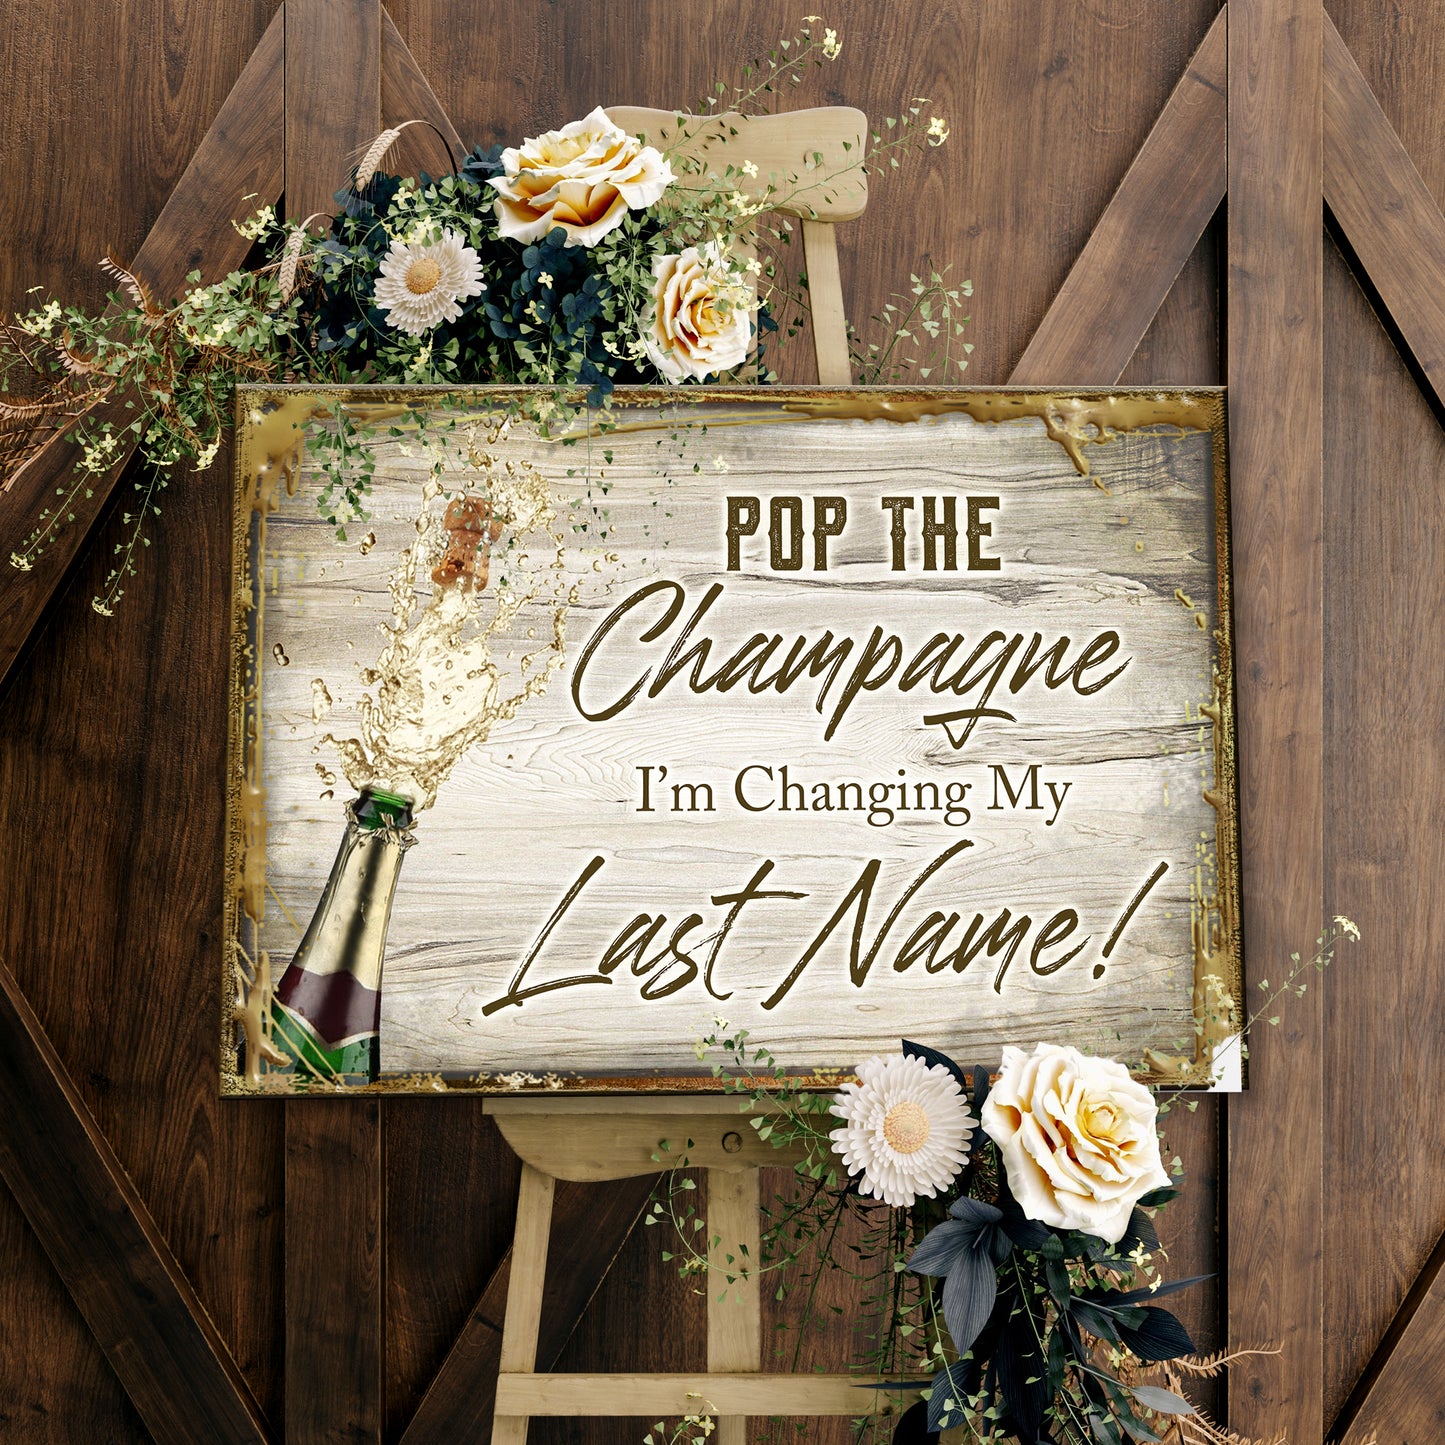 I'm Changing My Last Name Bridal Shower Sign - Image by Tailored Canvases